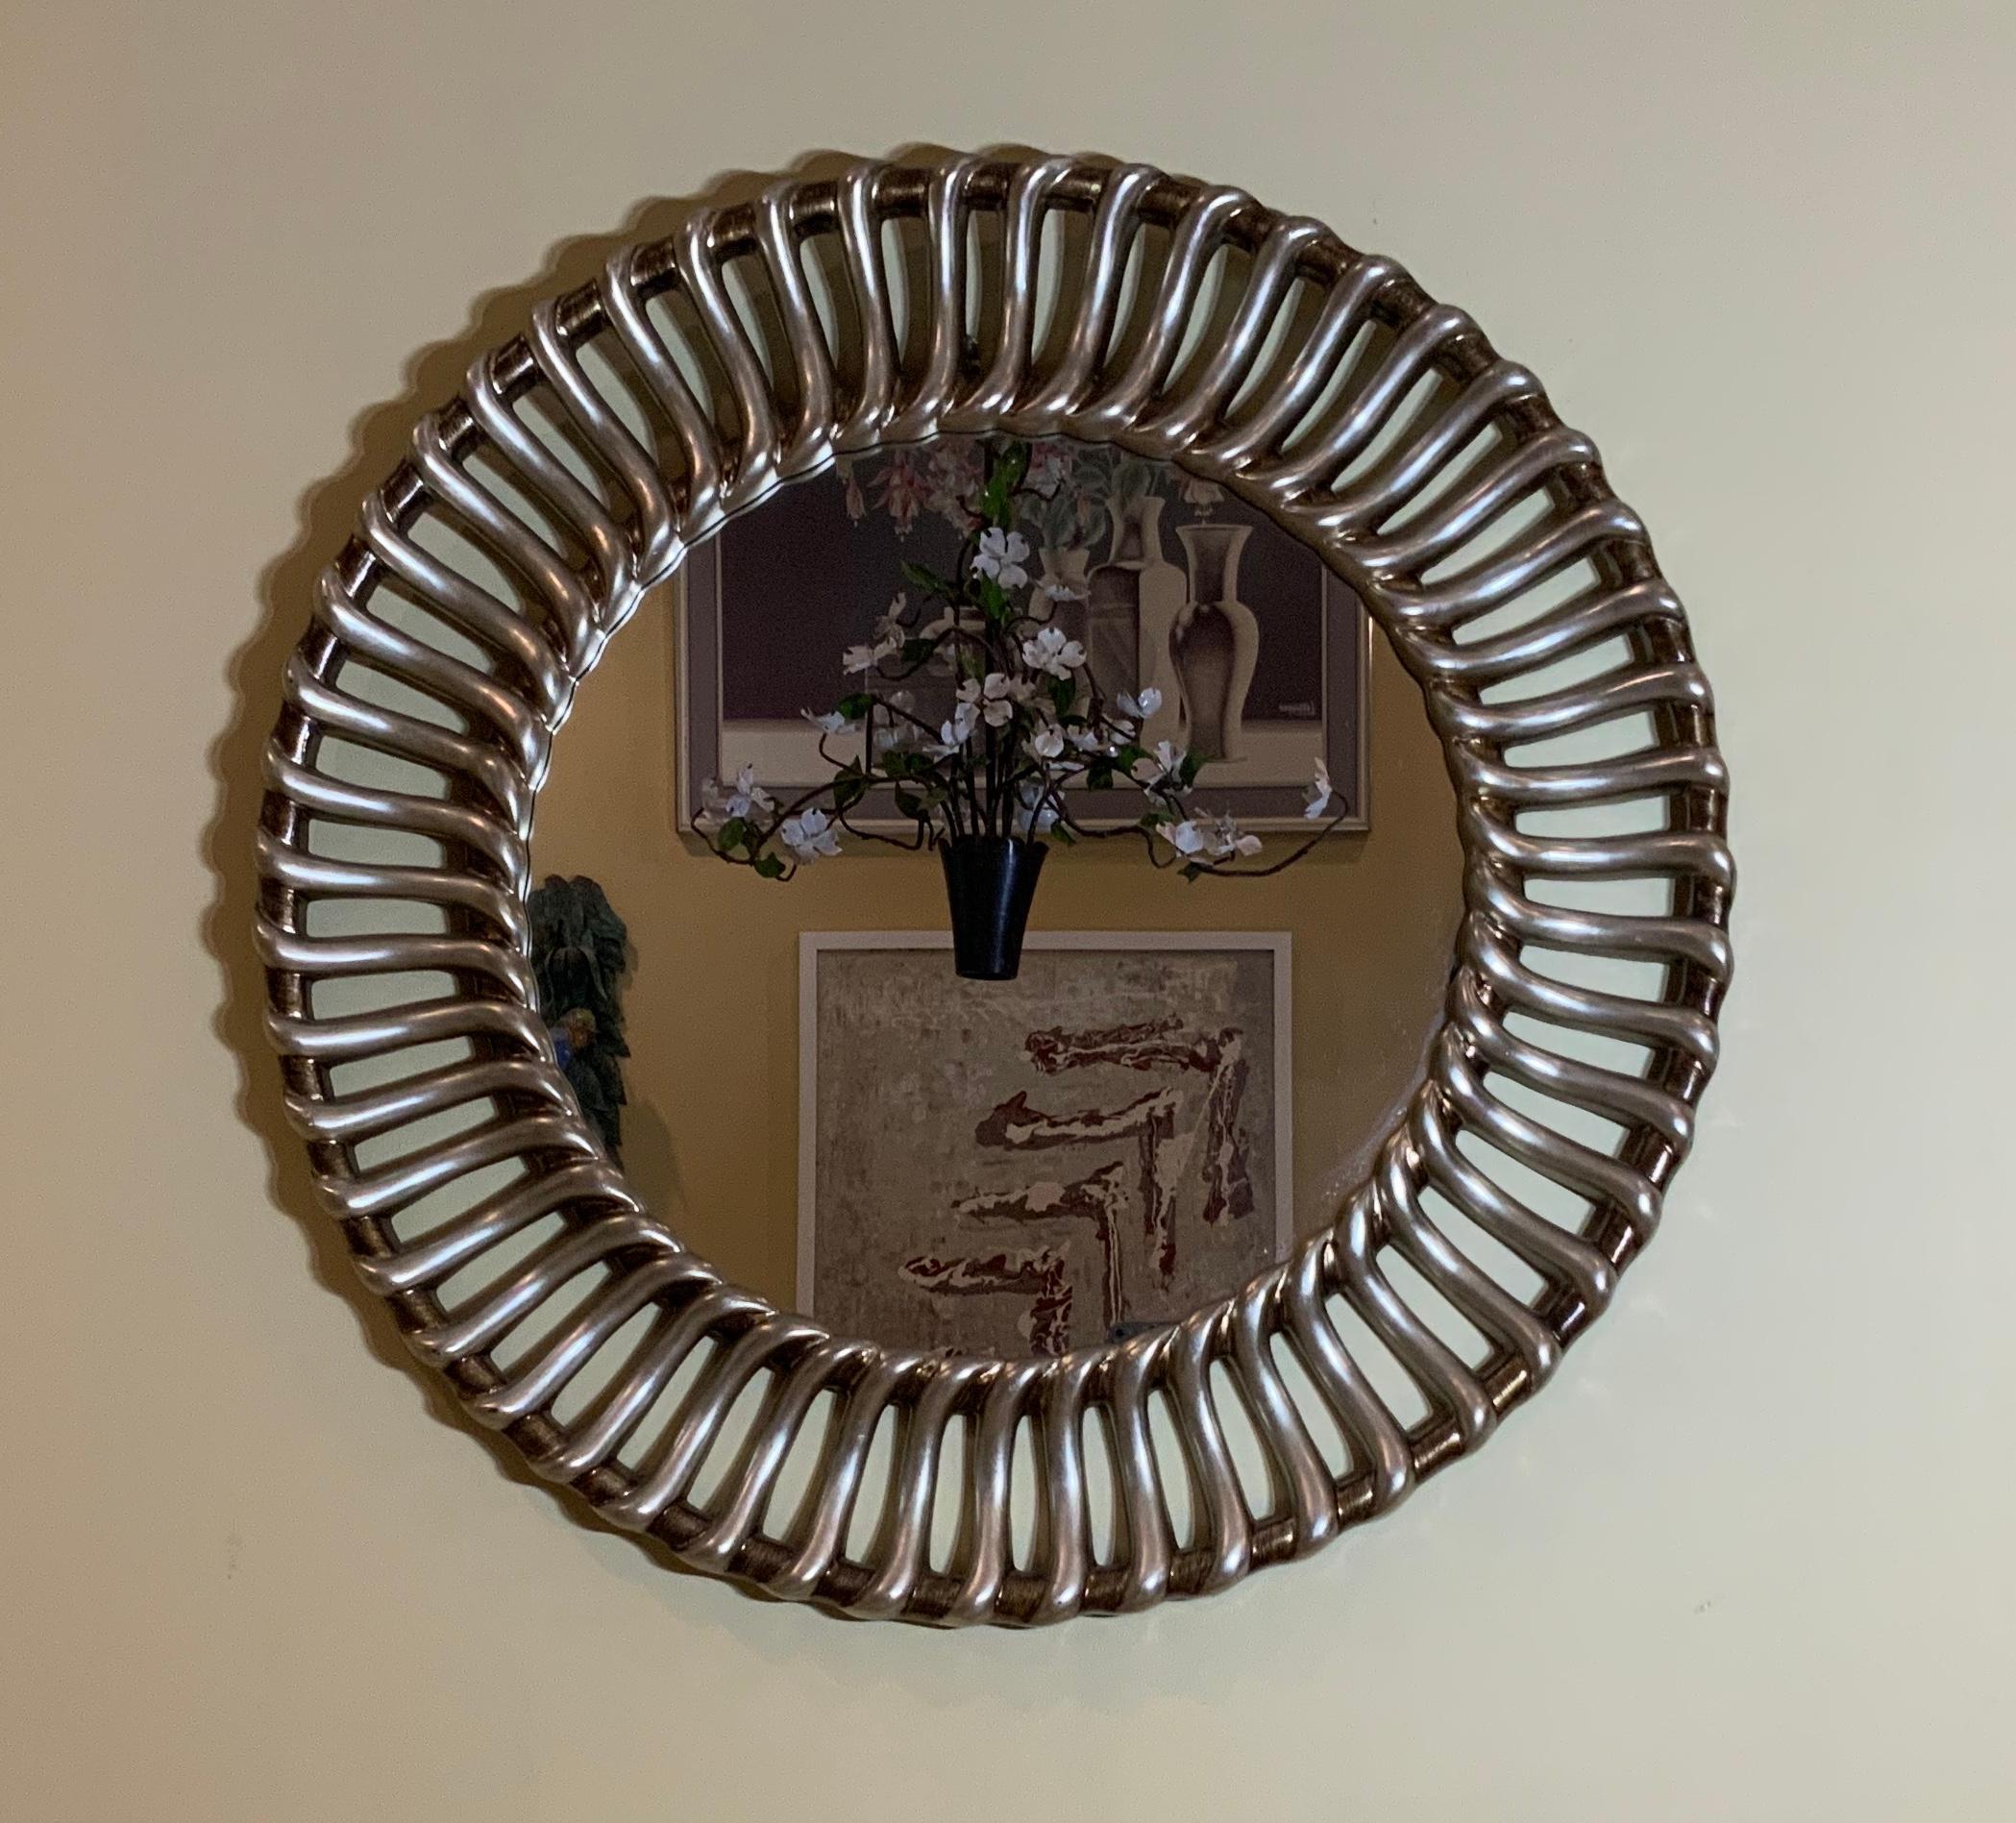 Elegant round mirror hand gilded with silver all around, great object of art for wall display.